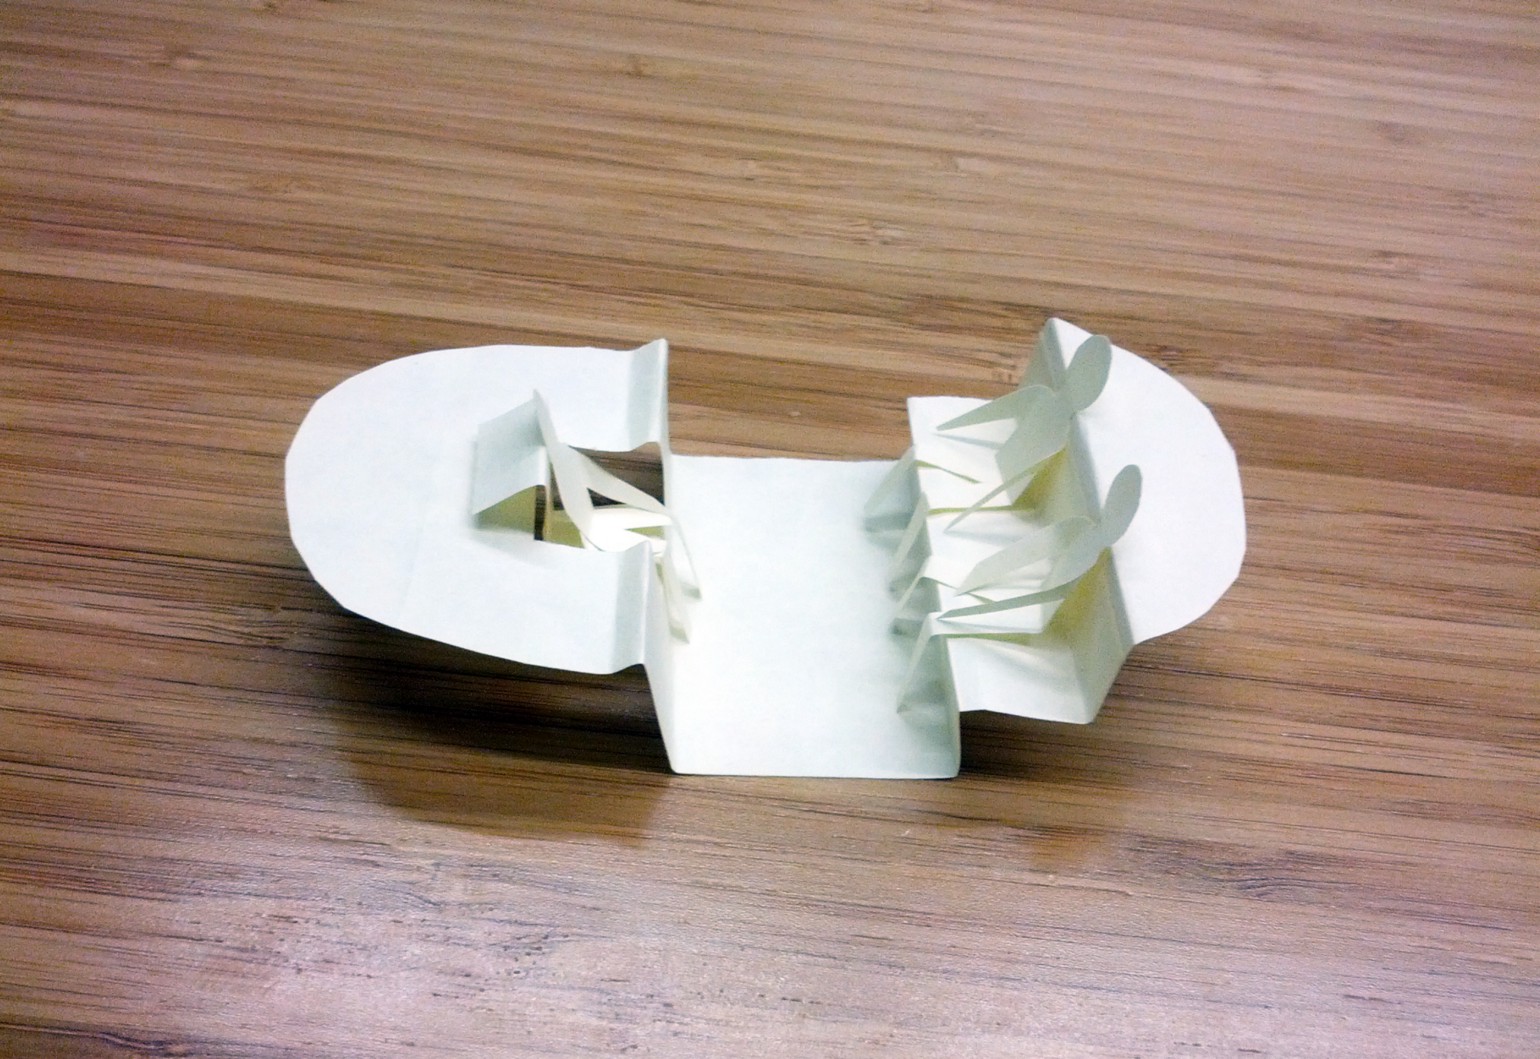 A photo of an early Firefly prototype made out of folded paper